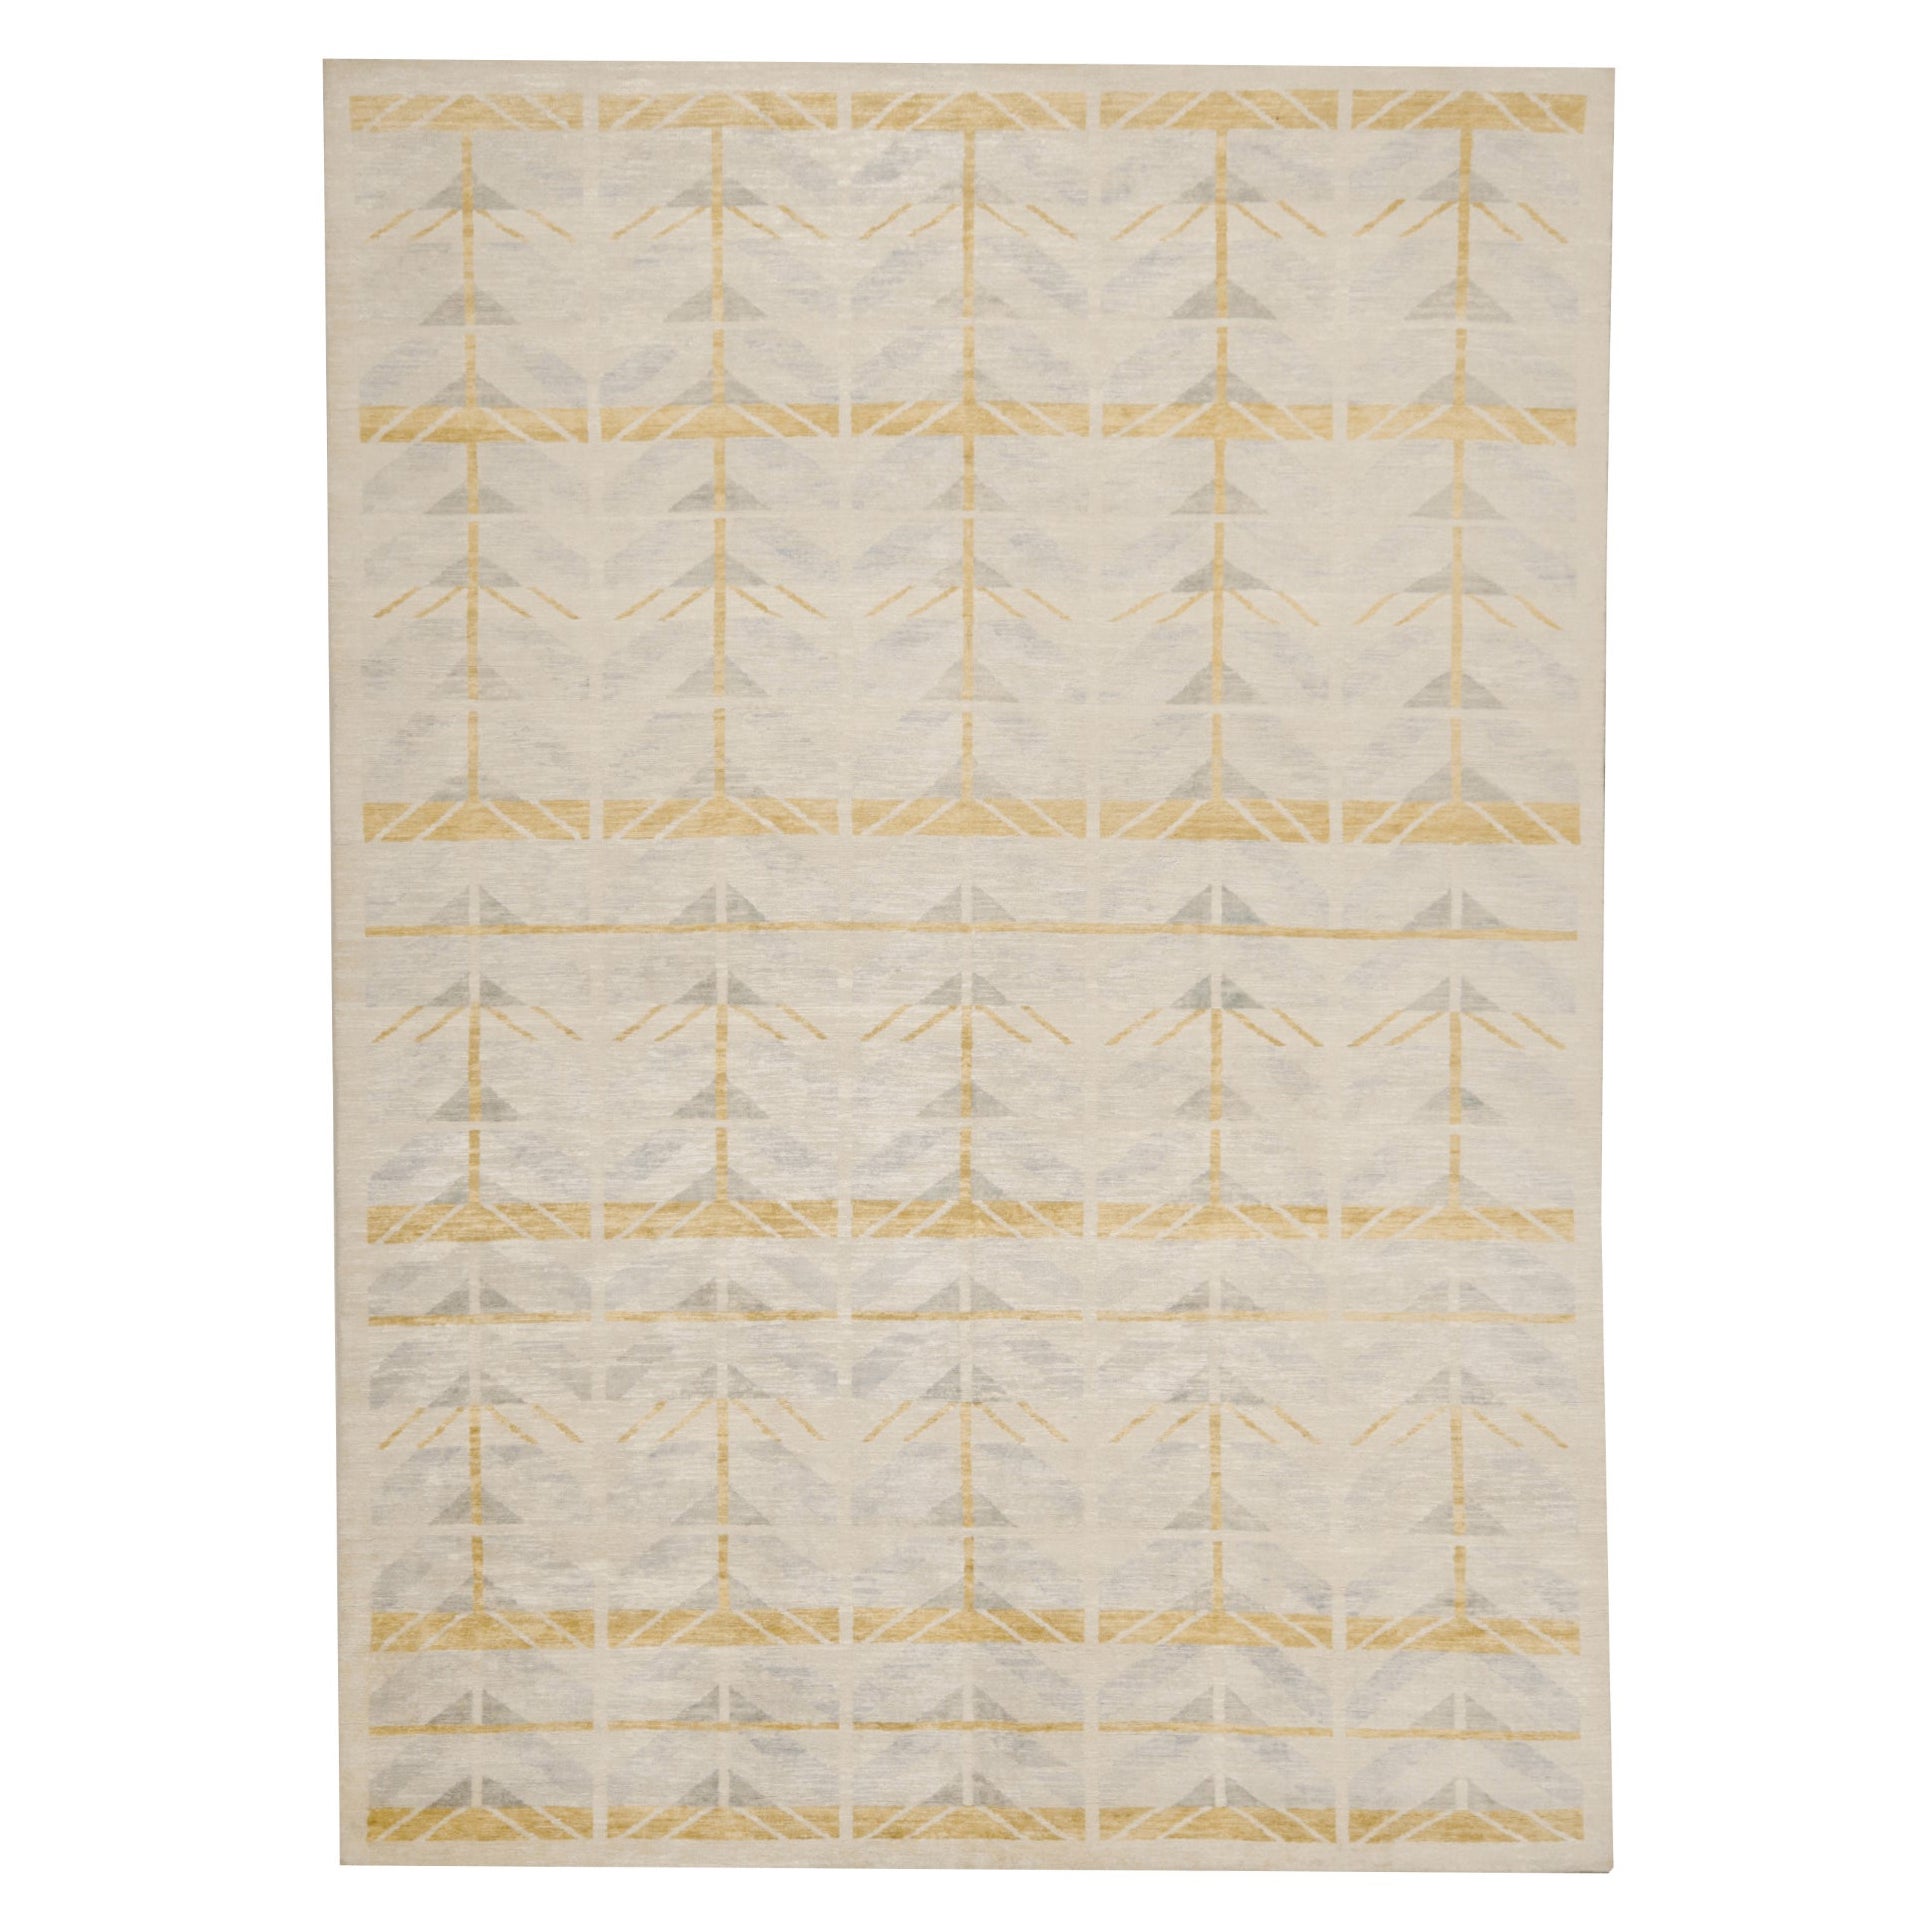 Rug & Kilim’s Scandinavian-Style Rug with Gold & Beige Geometric Patterns  For Sale